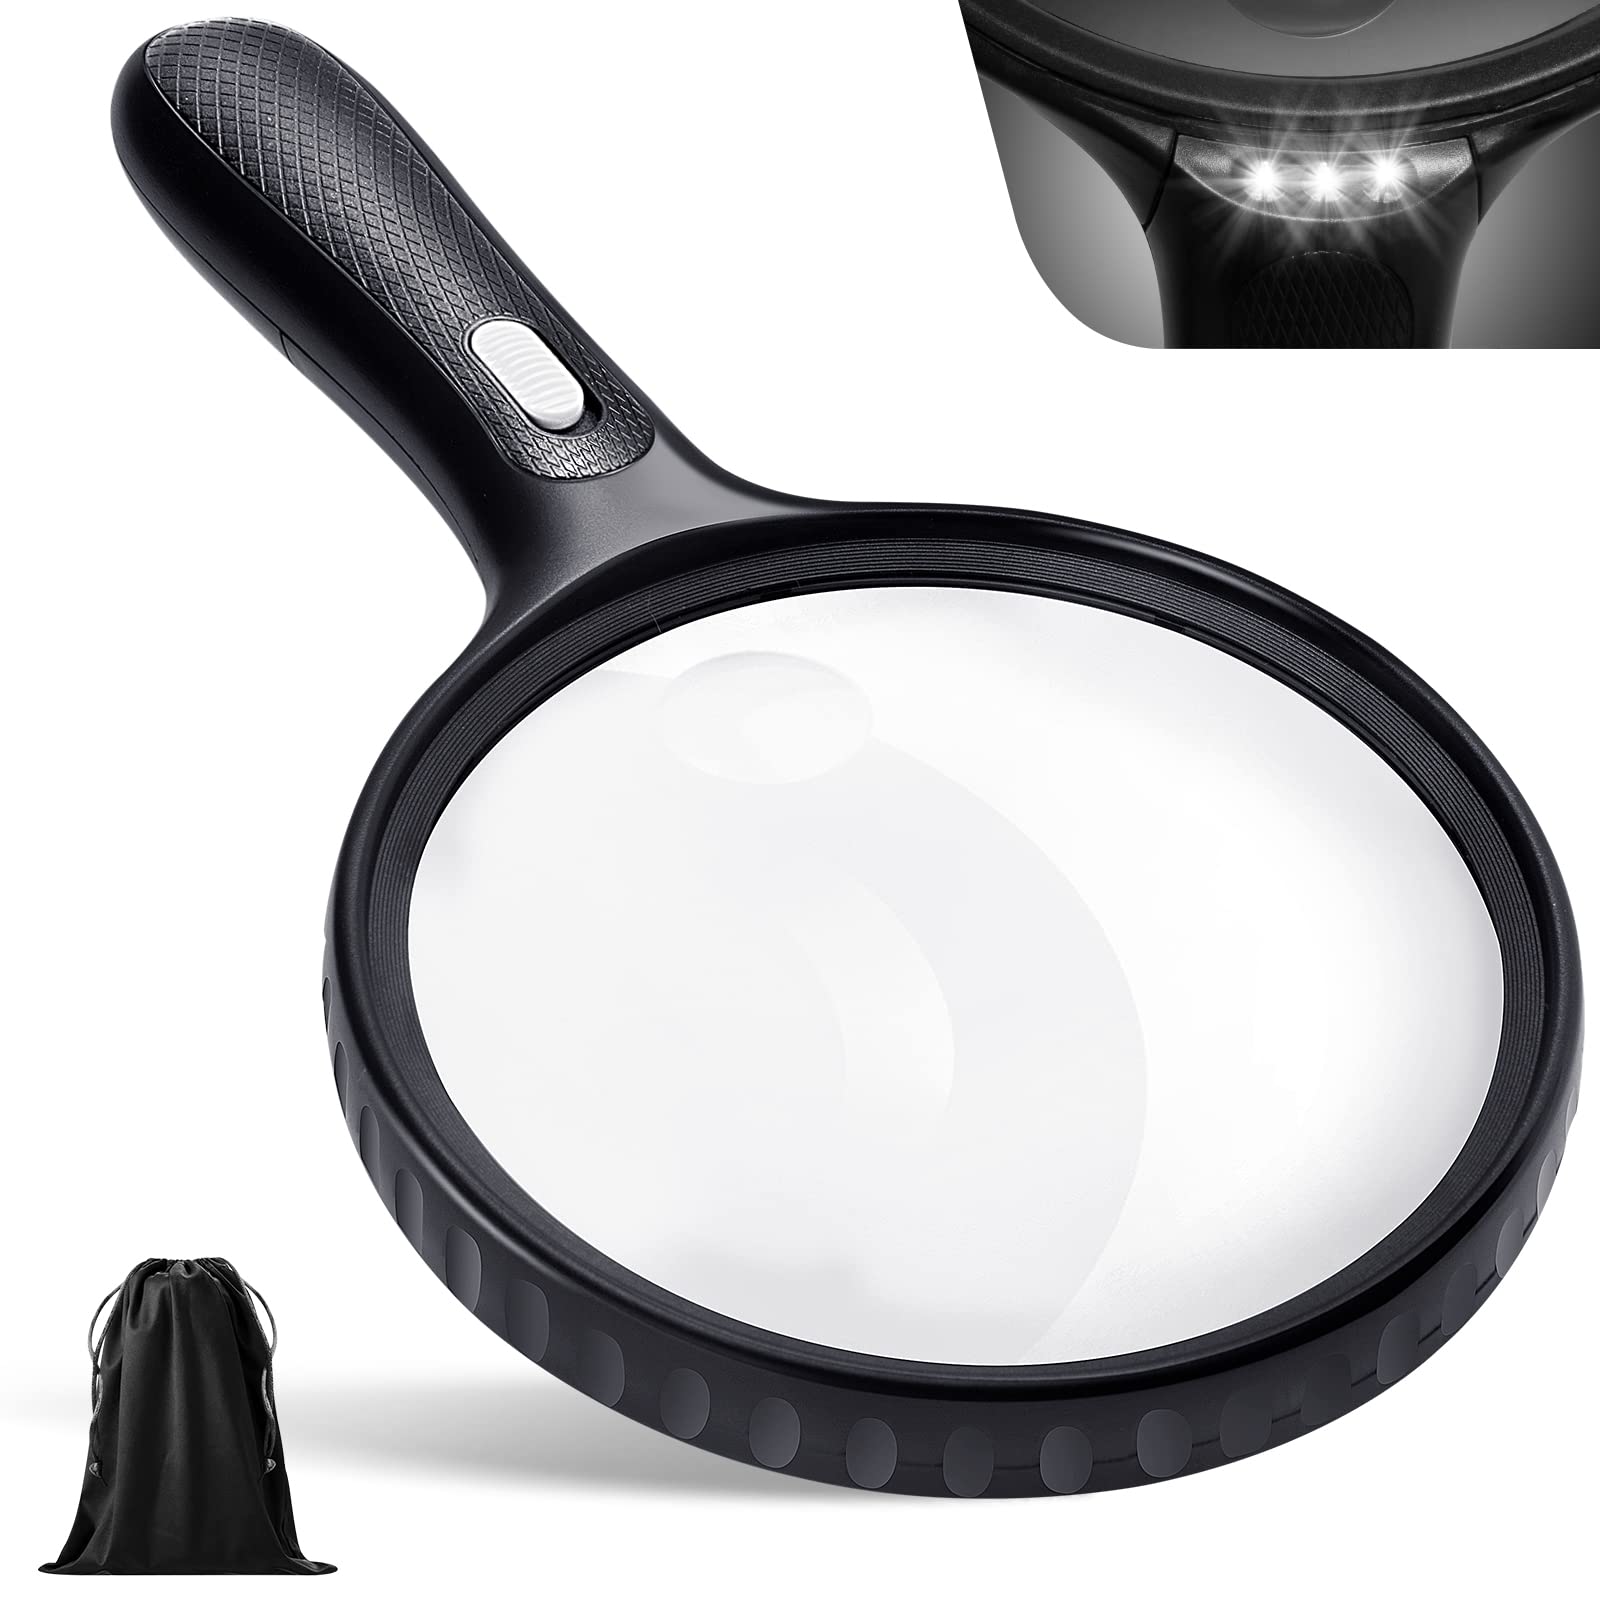 Magnifying Glass with Light, 5.5 Inch Large Magnifier 3X 10X Handheld  Illuminated Lighted Magnifier with 3